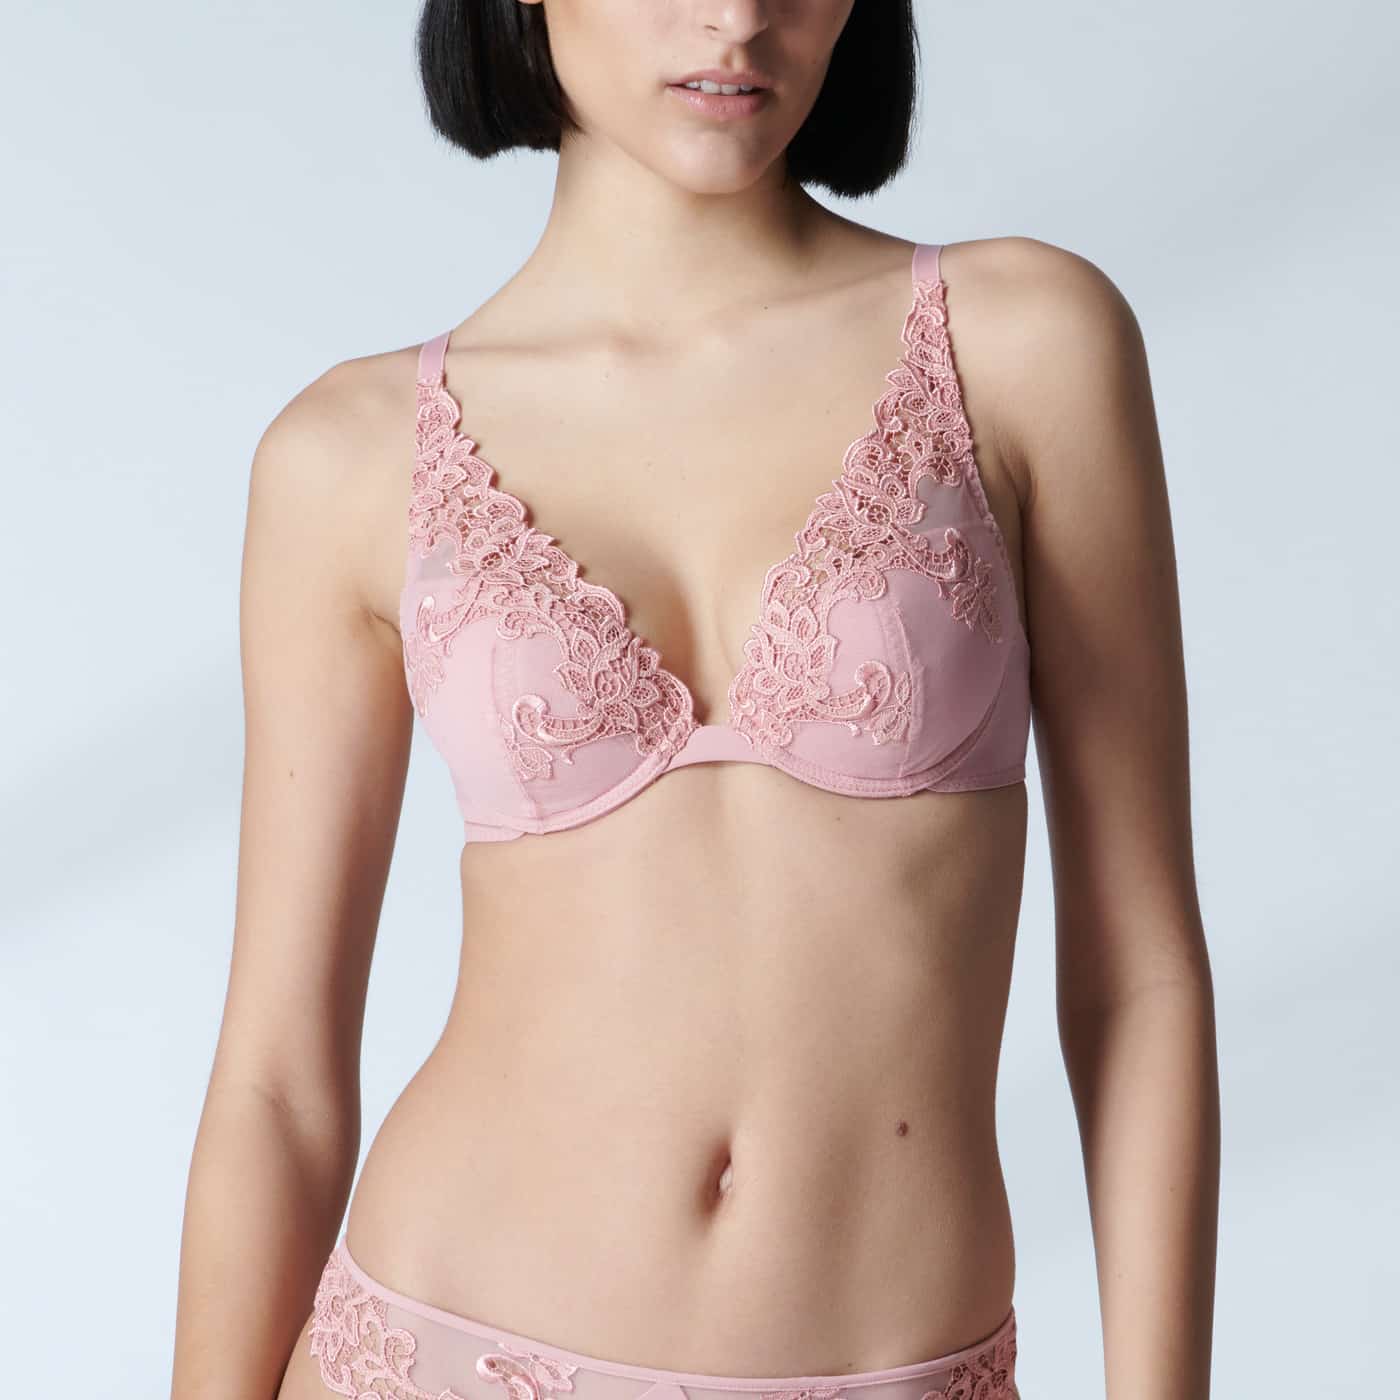 Lucca Triangle Bra - Hot Pink - $15.60 - CHANGE Lingerie